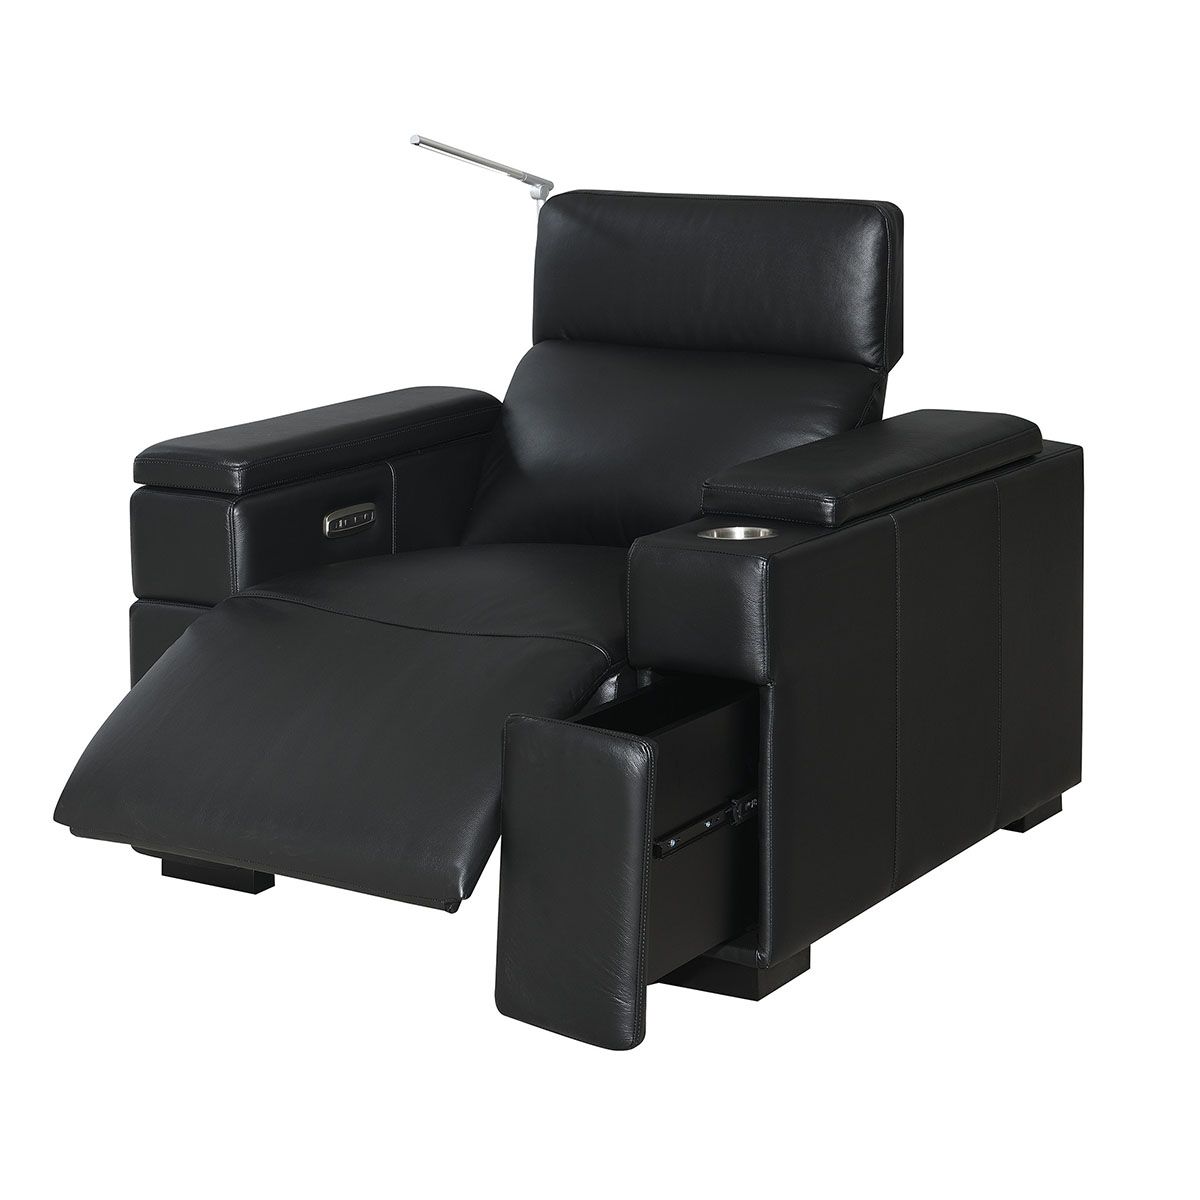 RowOne Calveri - Black Top Grain Leather w/ Matching Vinyl - Single Chair - angled front view - opened